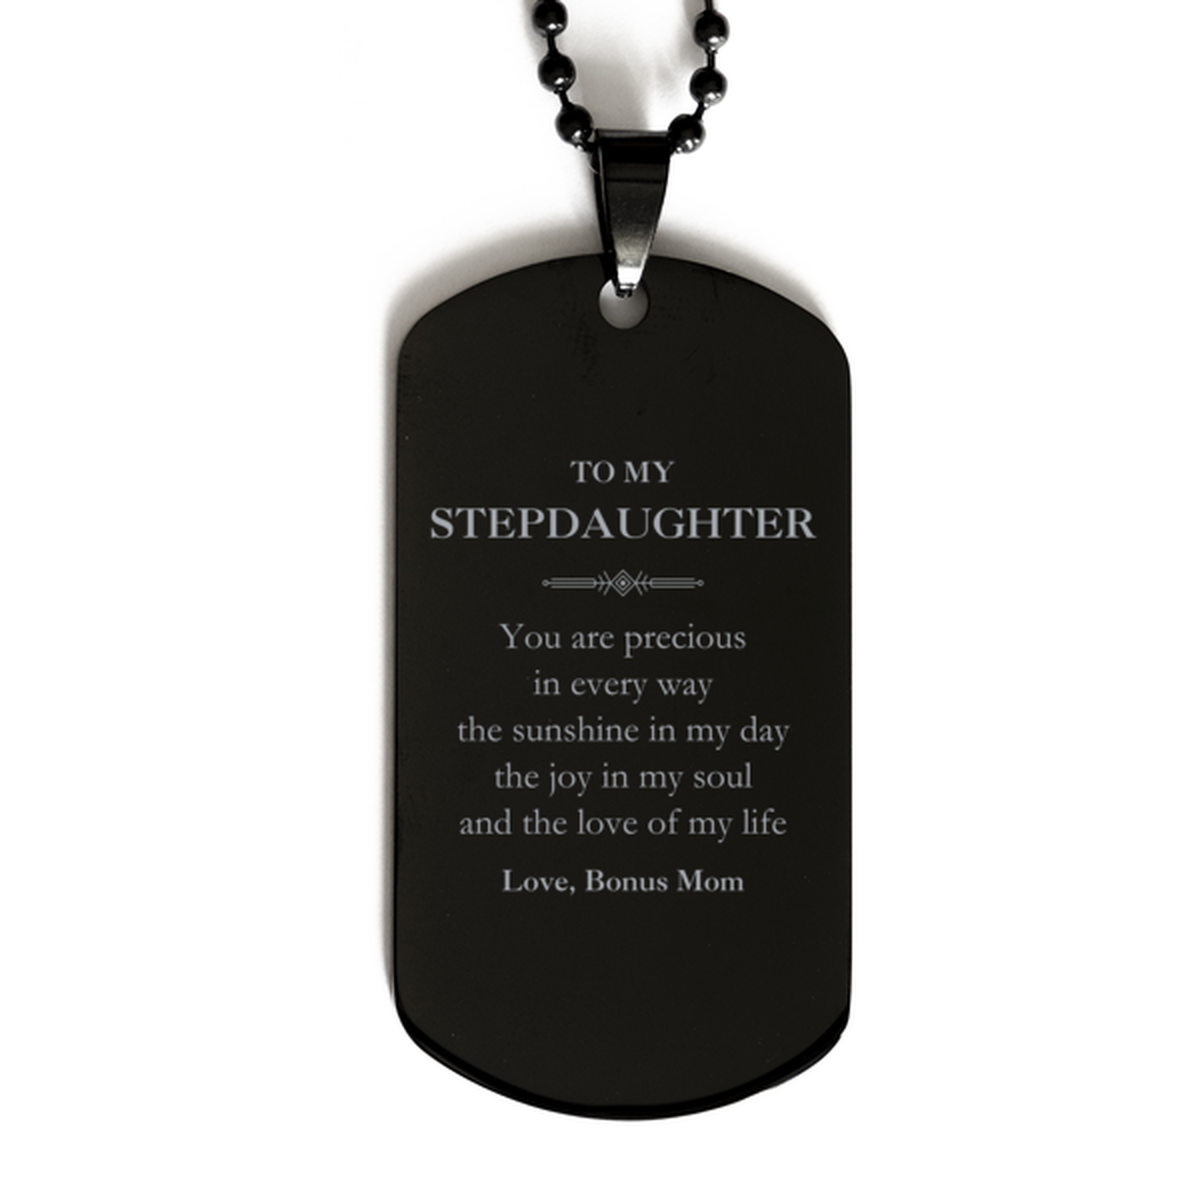 Graduation Gifts for Stepdaughter Black Dog Tag Present from Bonus Mom, Christmas Stepdaughter Birthday Gifts Stepdaughter You are precious in every way the sunshine in my day. Love, Bonus Mom